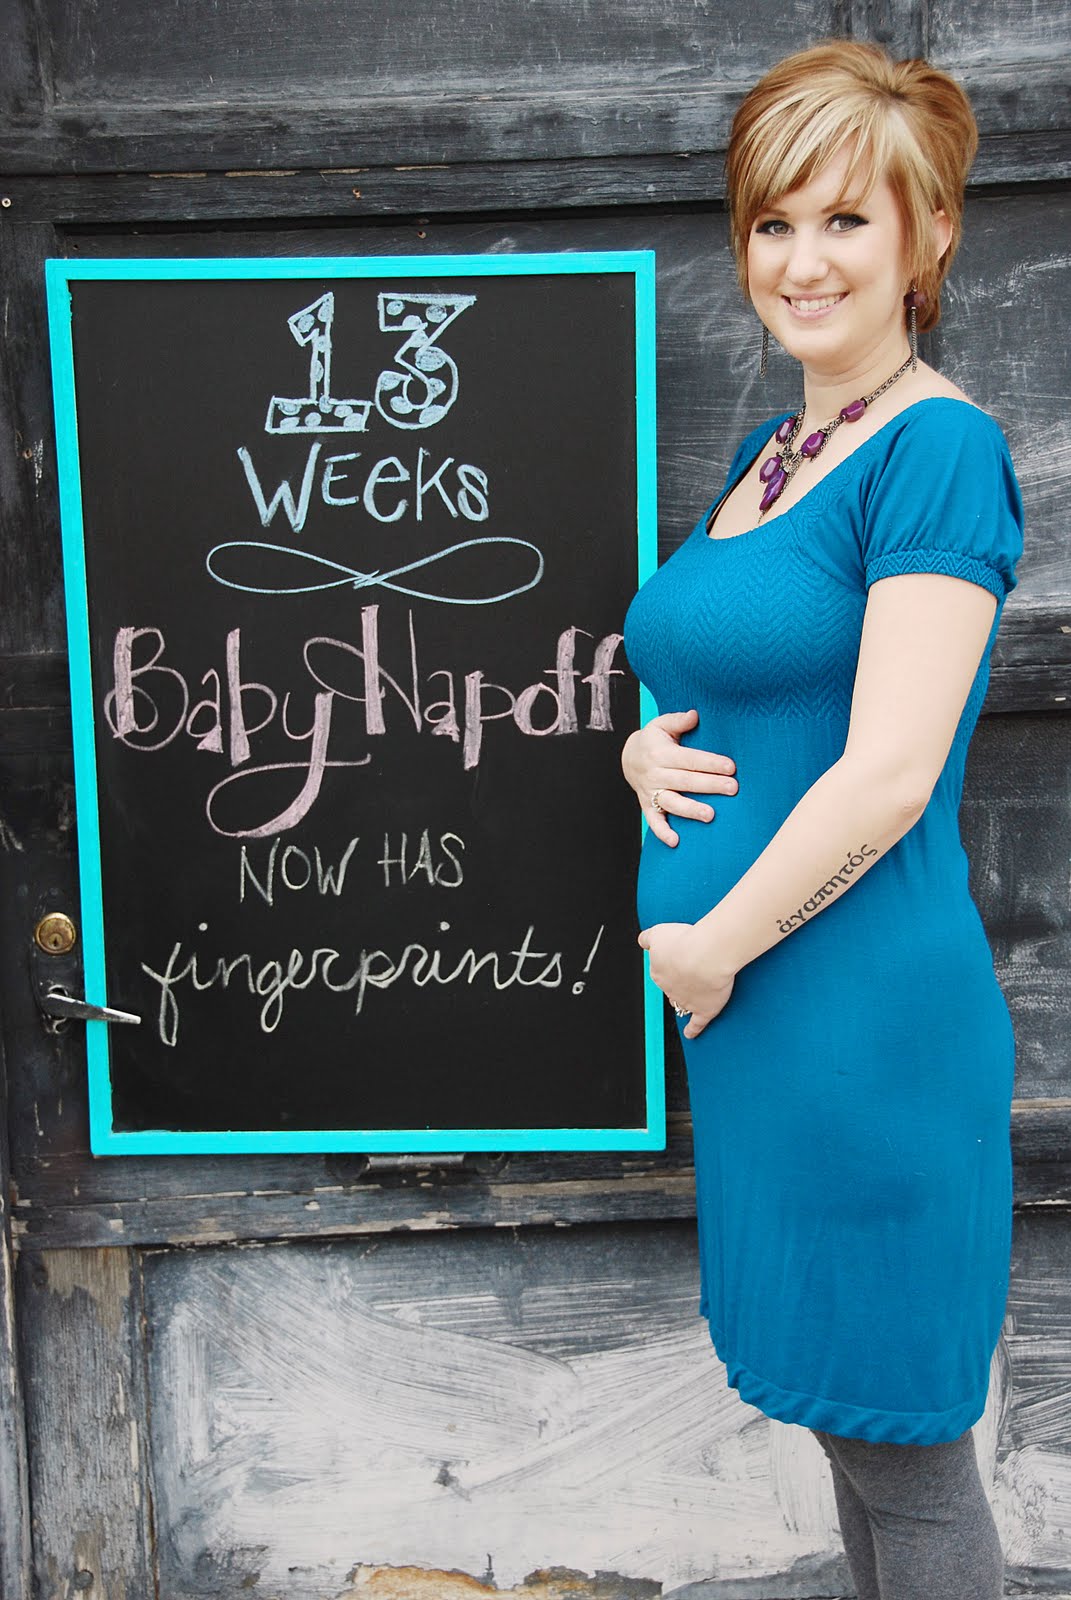 A Bushel and a Peck: 13 weeks and funny happenings